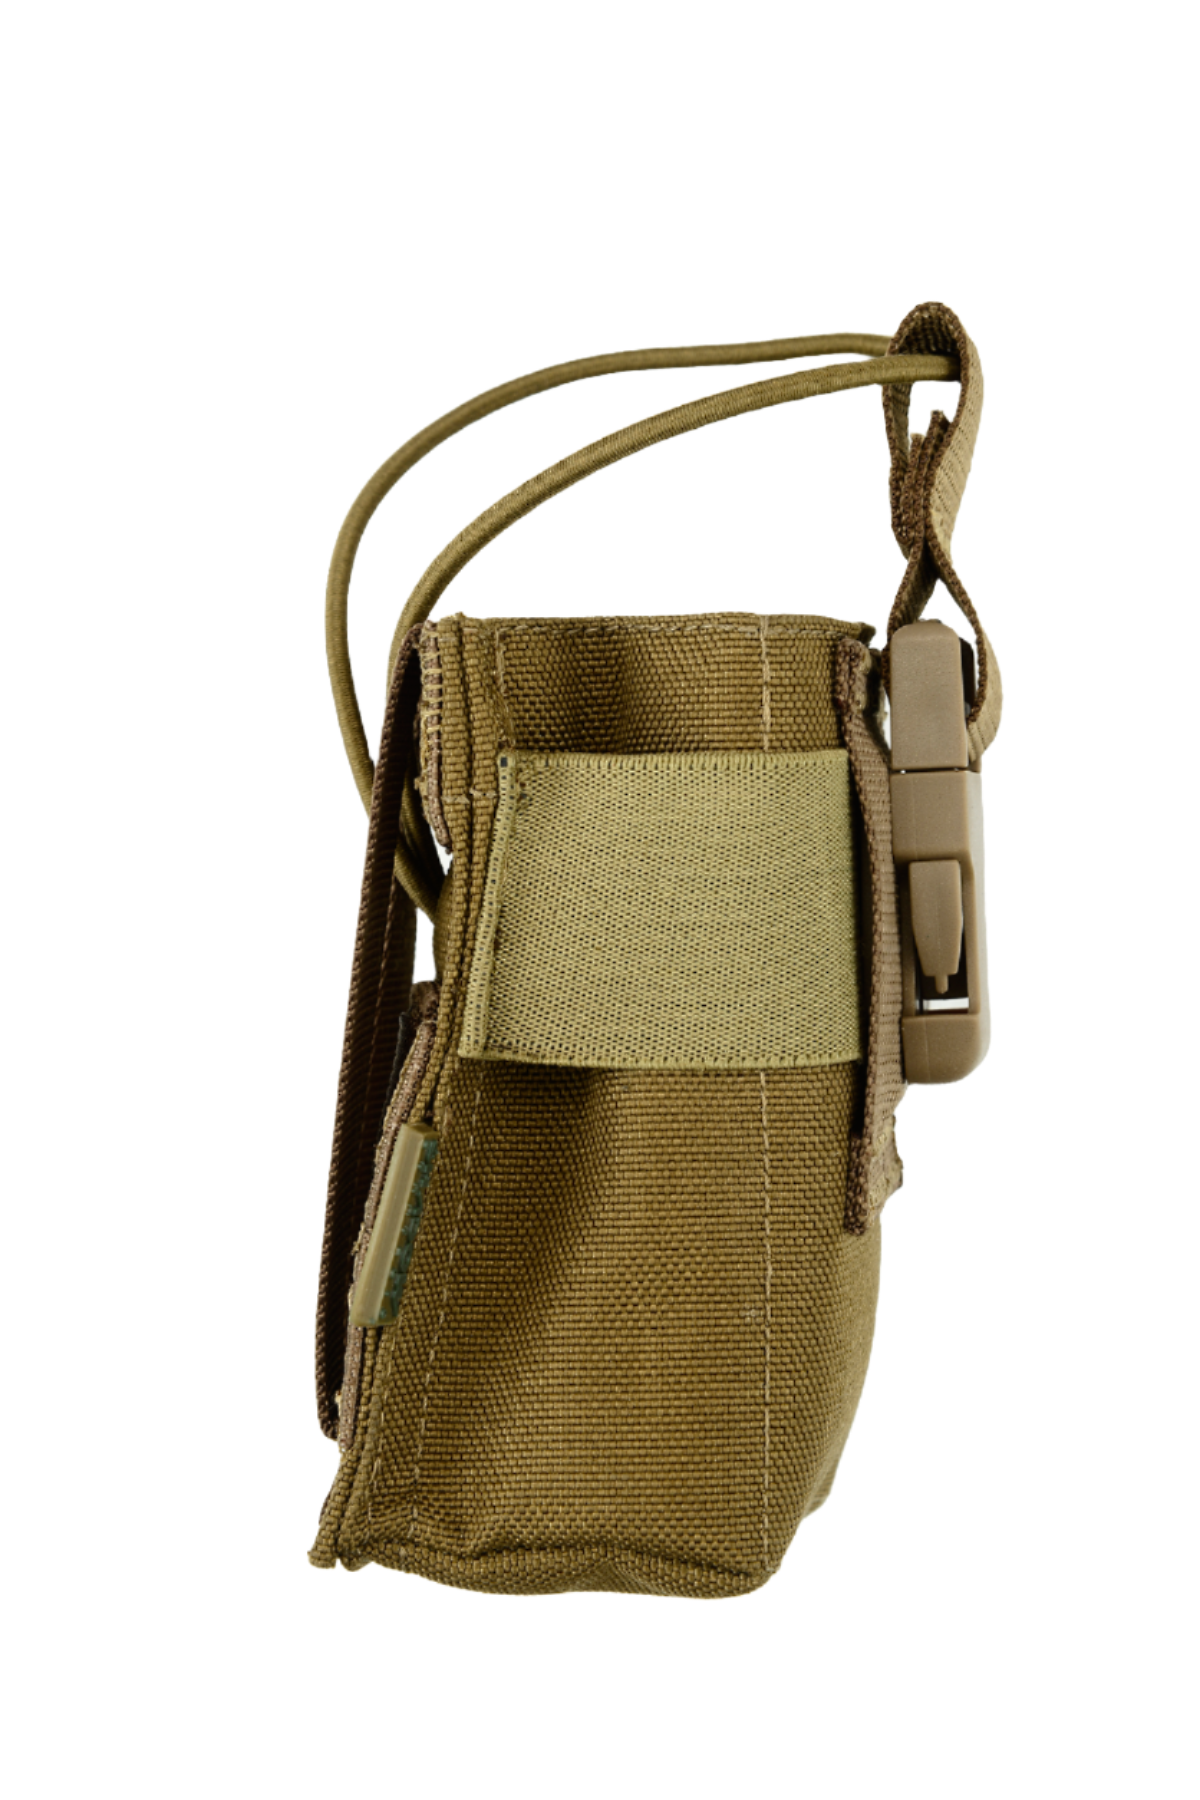 SHE-21090 "ARP" ADJUSTABLE RADIO POUCH SIDE PIC COYOTE COLOUR